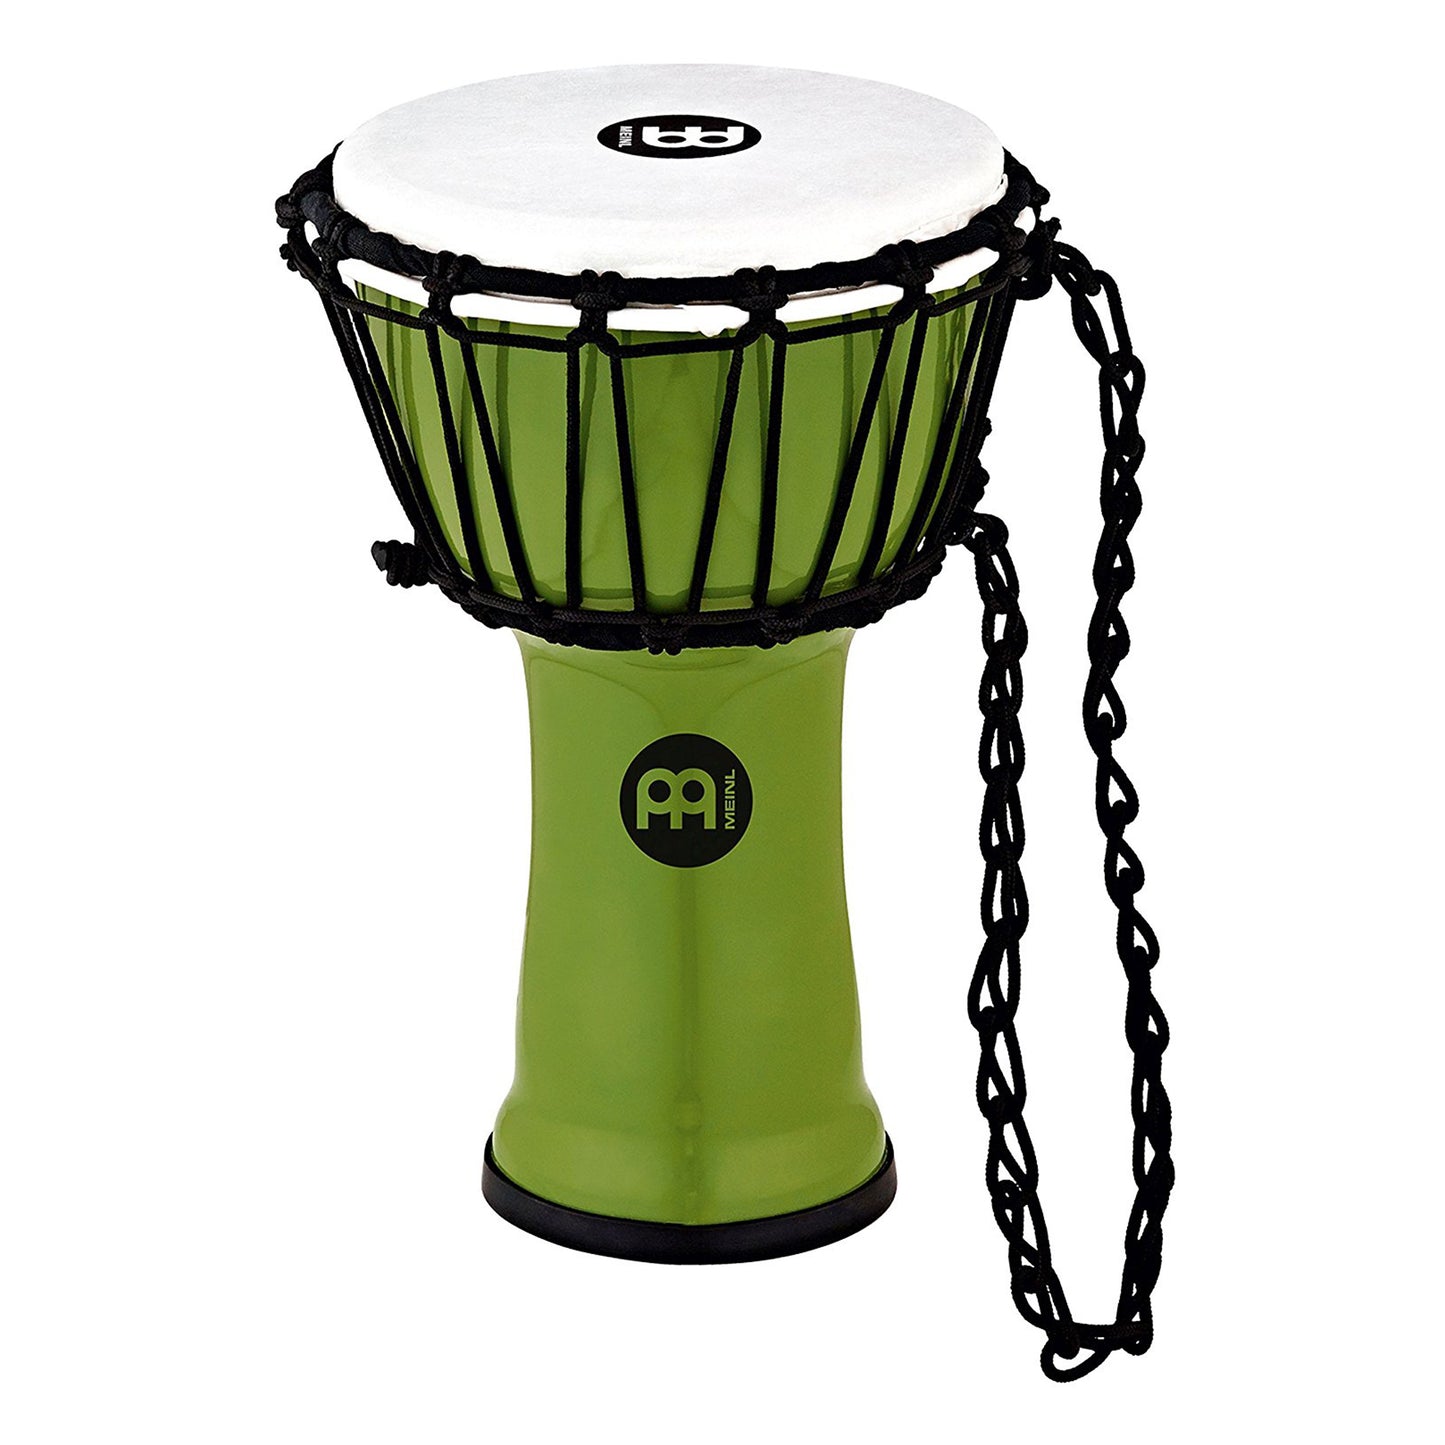 Meinl Percussion JRD-G Synthetic Compact Junior Djembe, 7" Diameter, Green